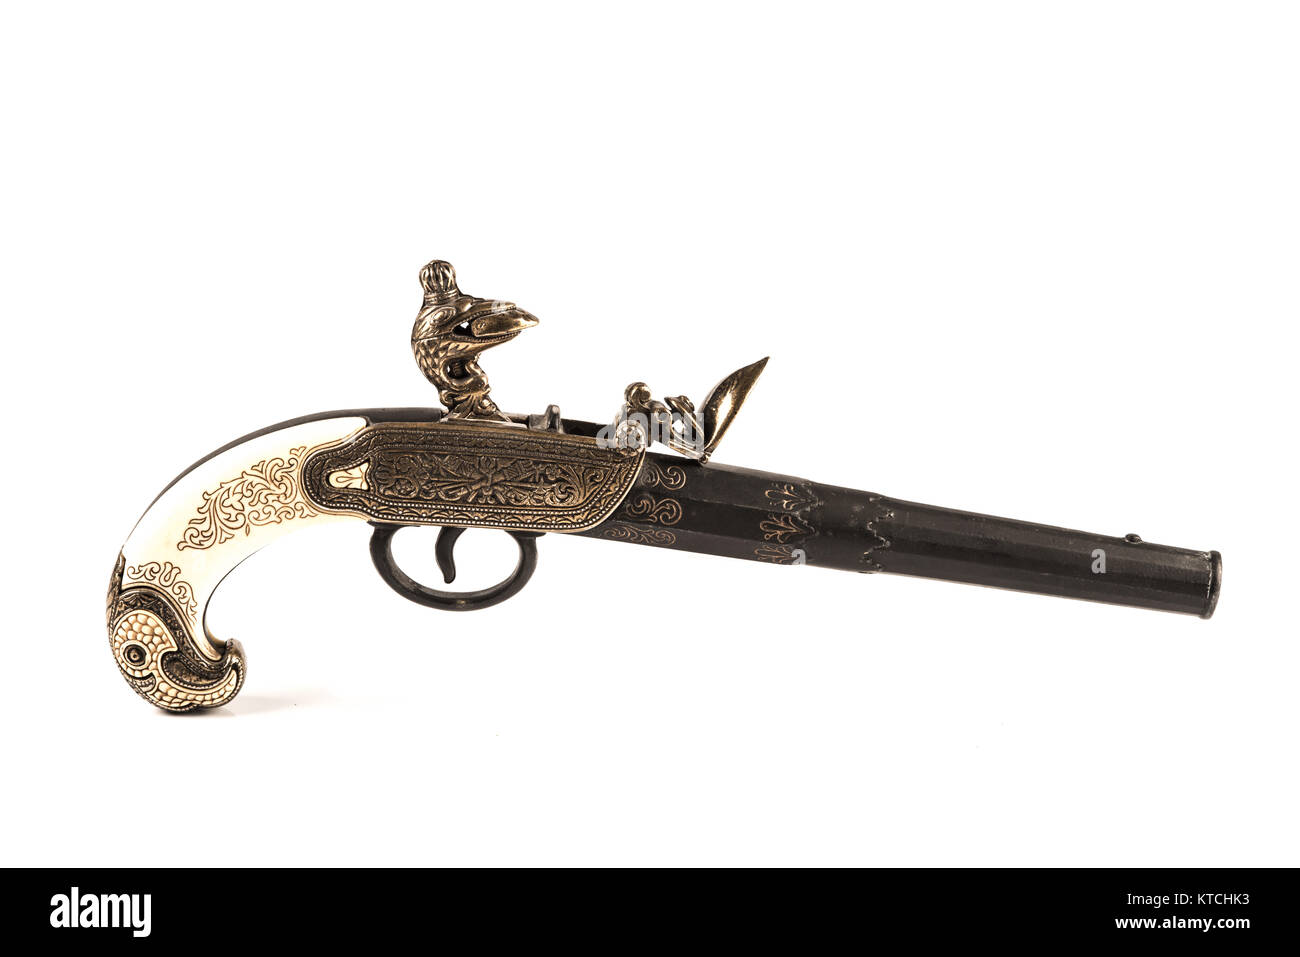 Flintlock pistol with engraved handle over a white background Stock Photo